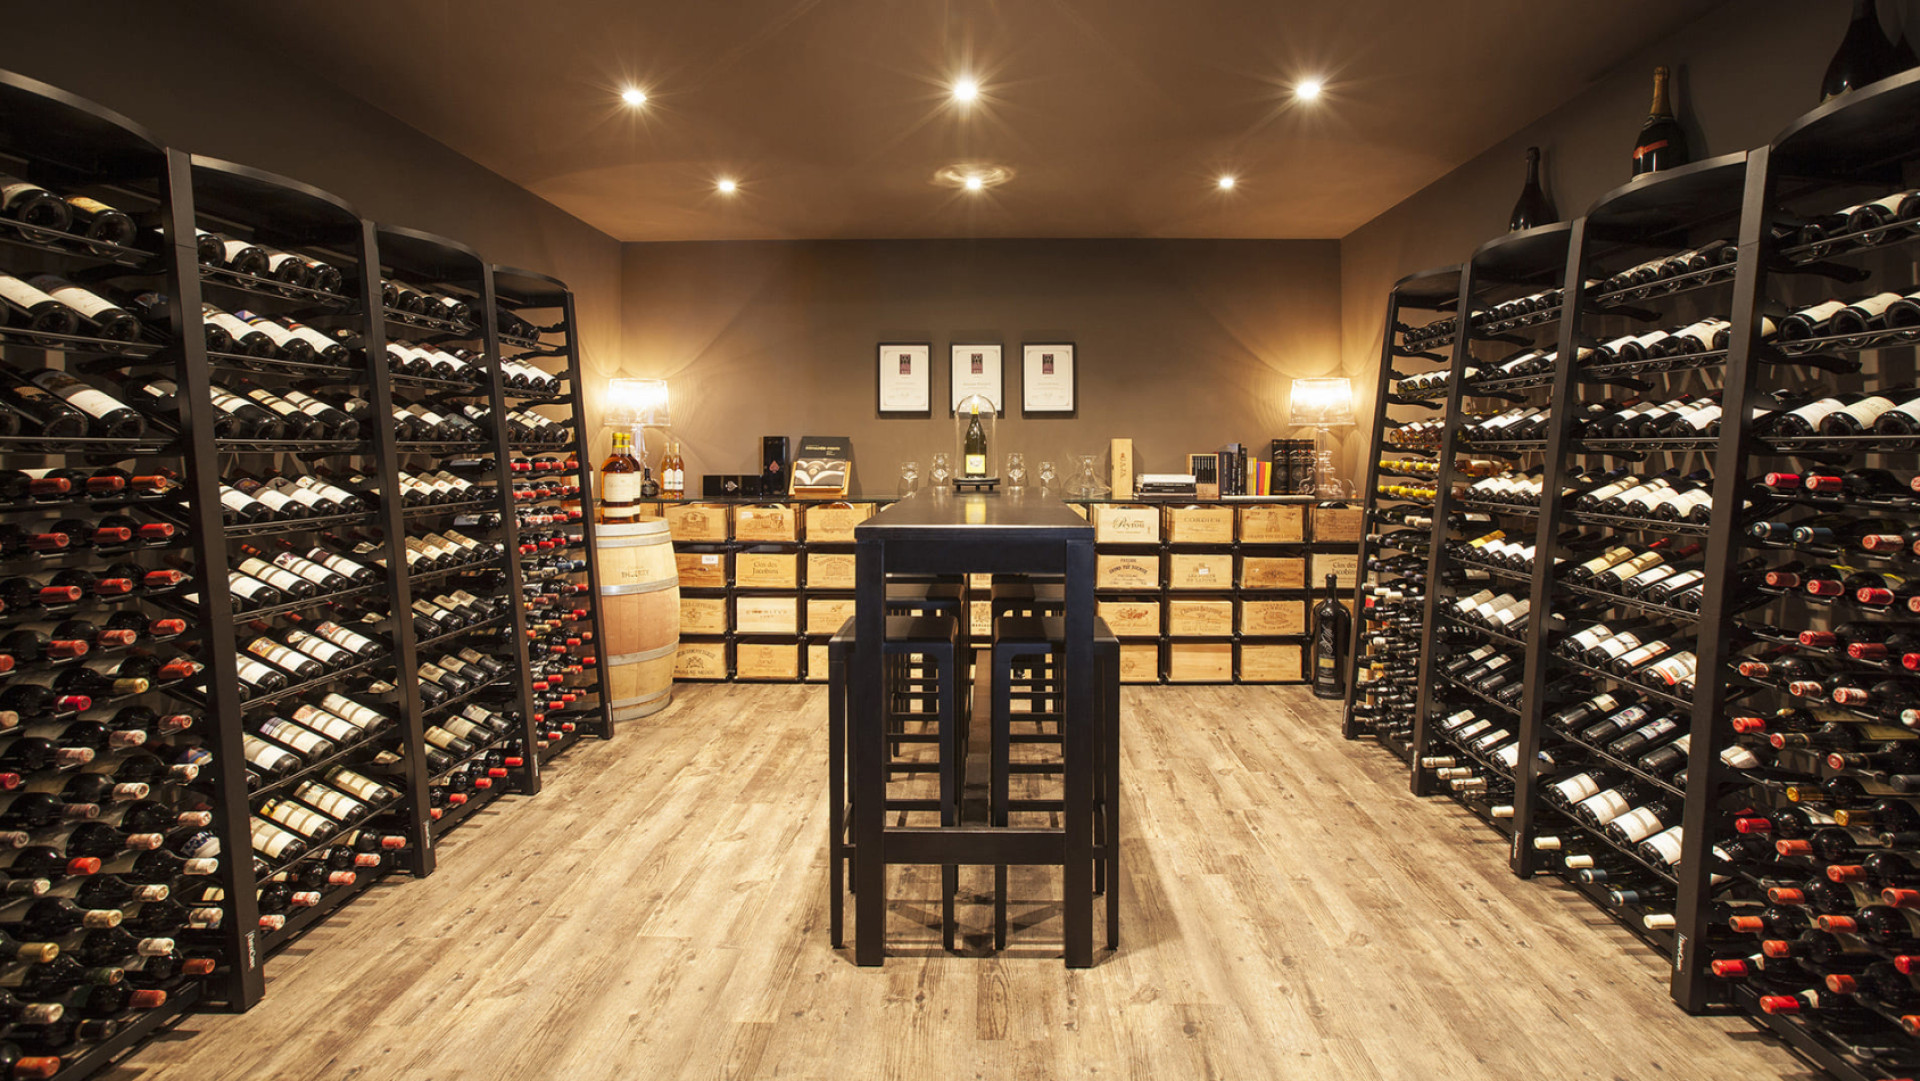 Modern wine cellar layout. Create a professional tasting area in your store to let your customers taste your wines. Modulosteel EuroCave wine storage system